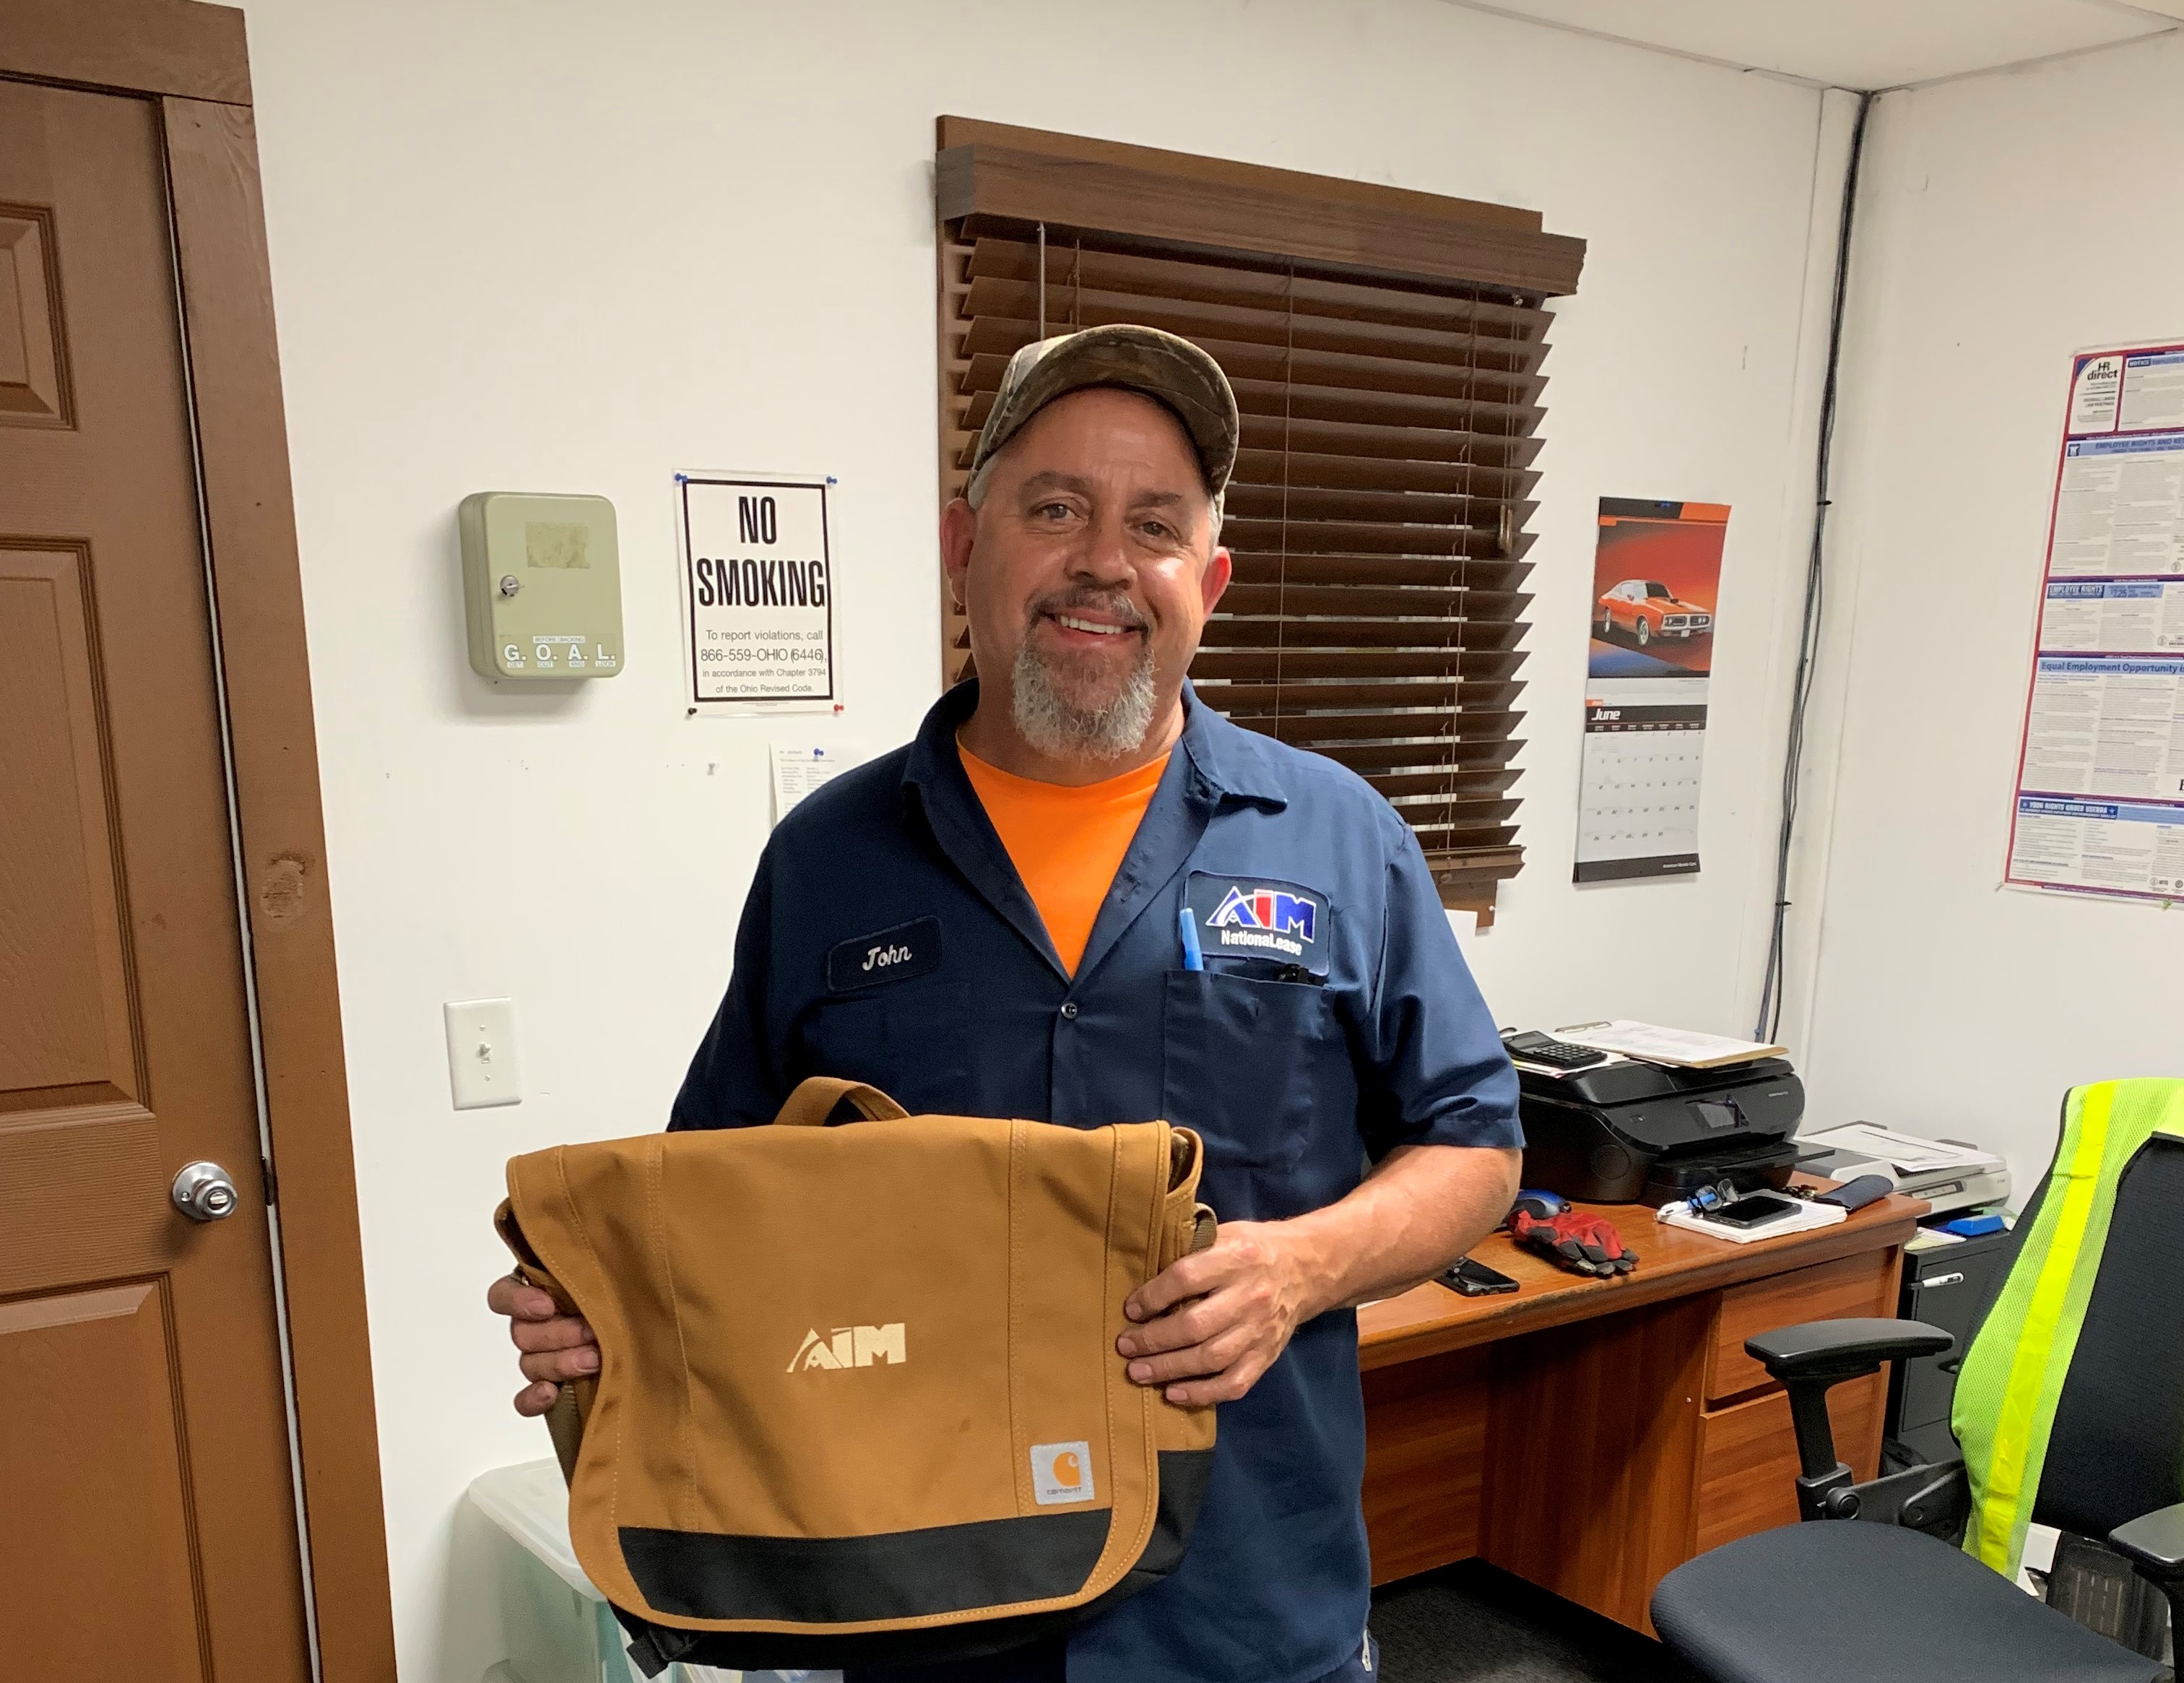 n recognition of his performance, John Hinkle received an Aim Carhartt laptop bag and a gift card.